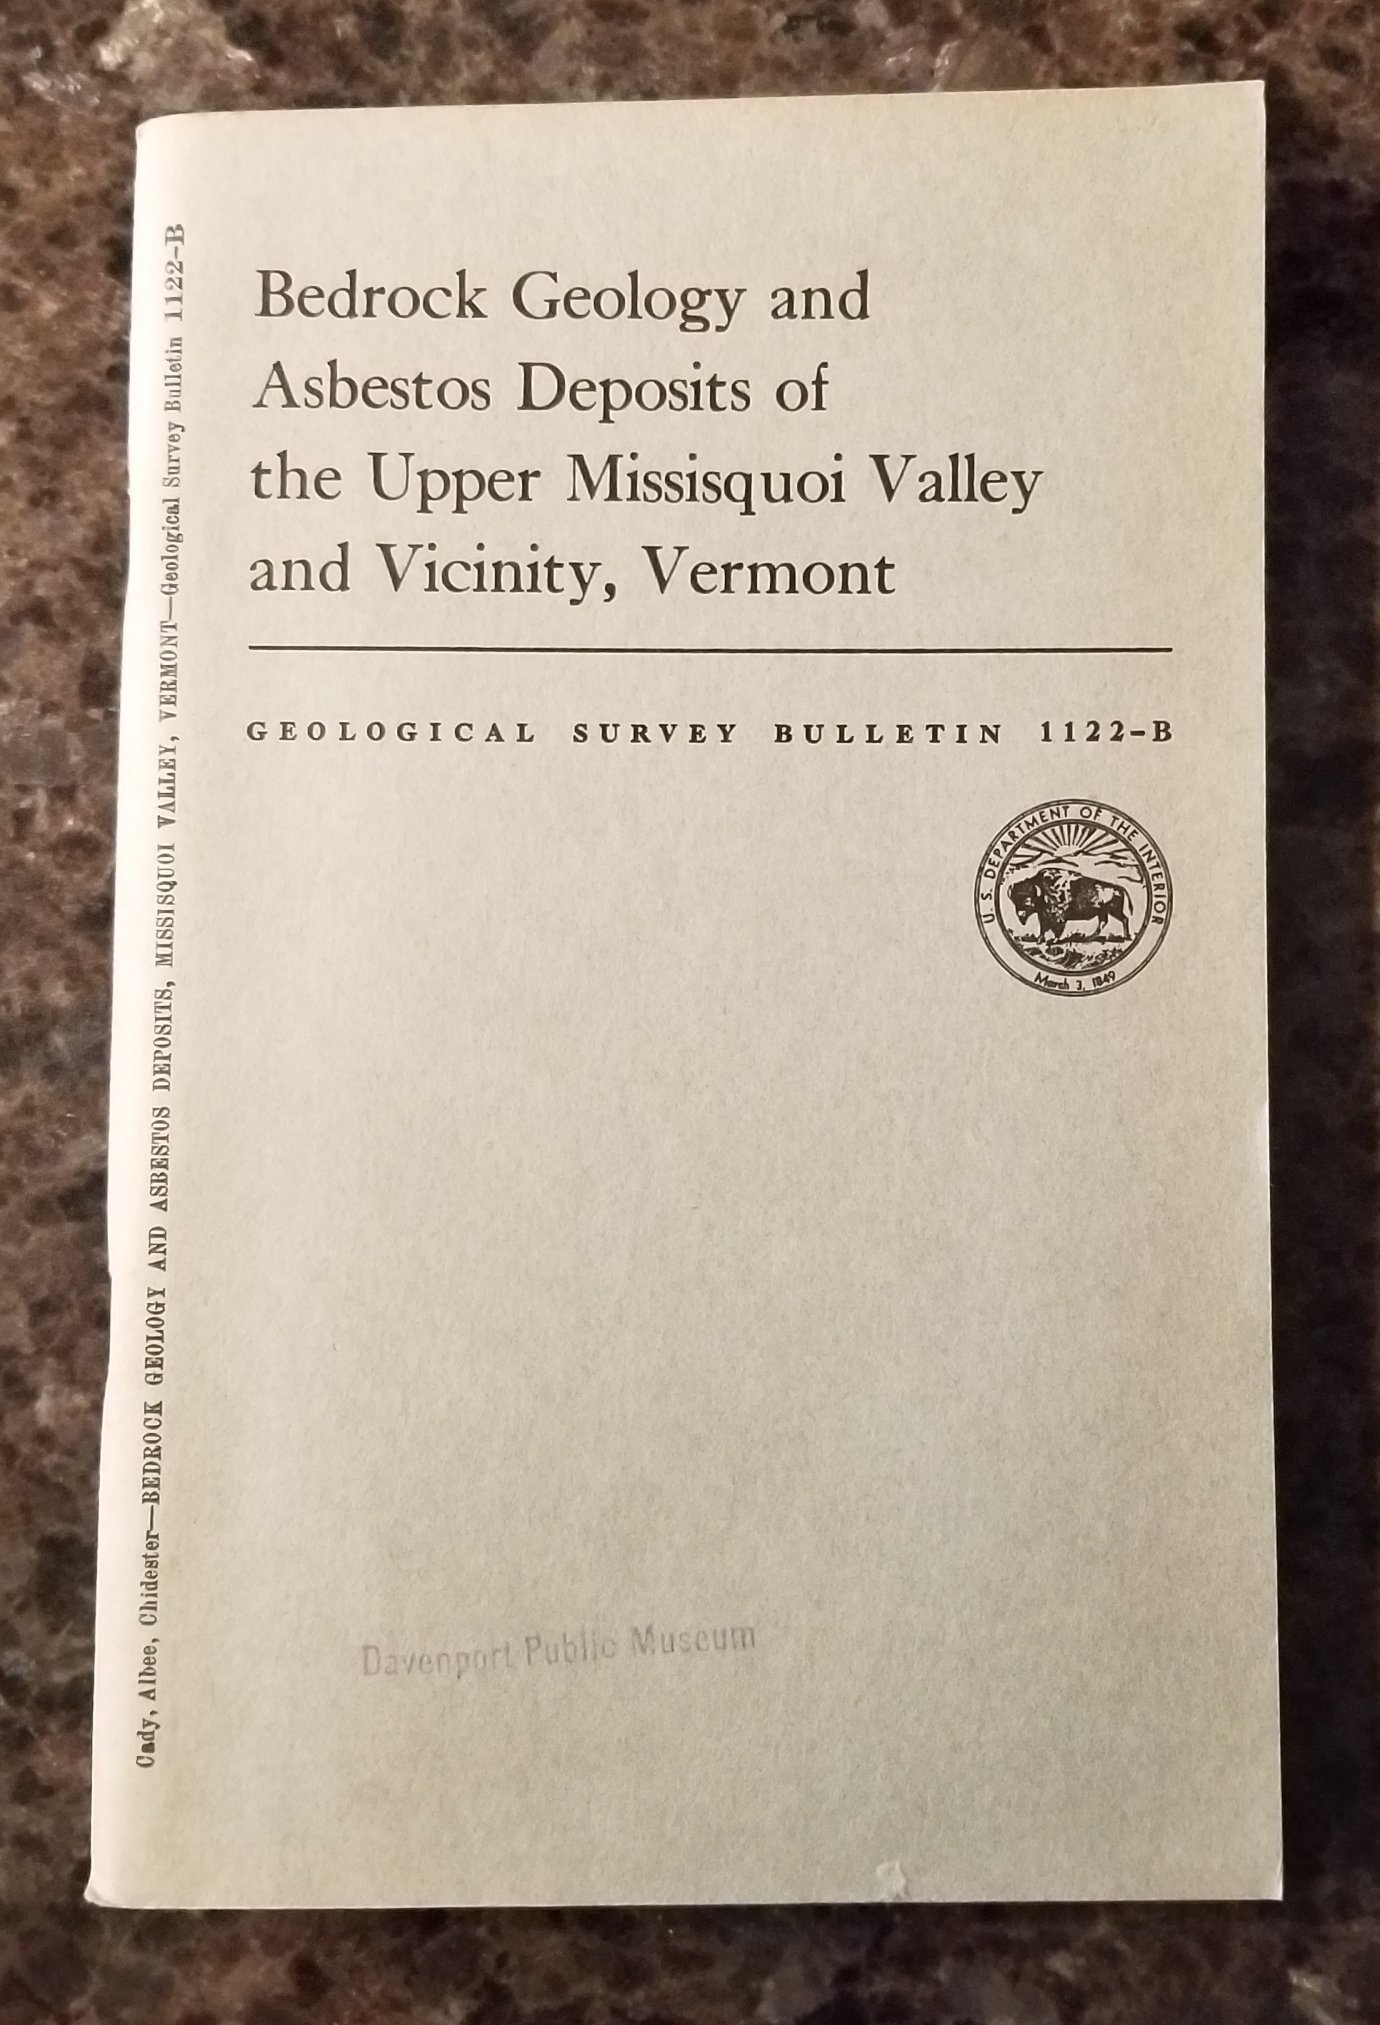 Image for Bedrock Geology and Asbestos Deposits of the Upper Missisquoi Valley and Vicinity, Vermont. Geological Survey Bulletin 1122-B.